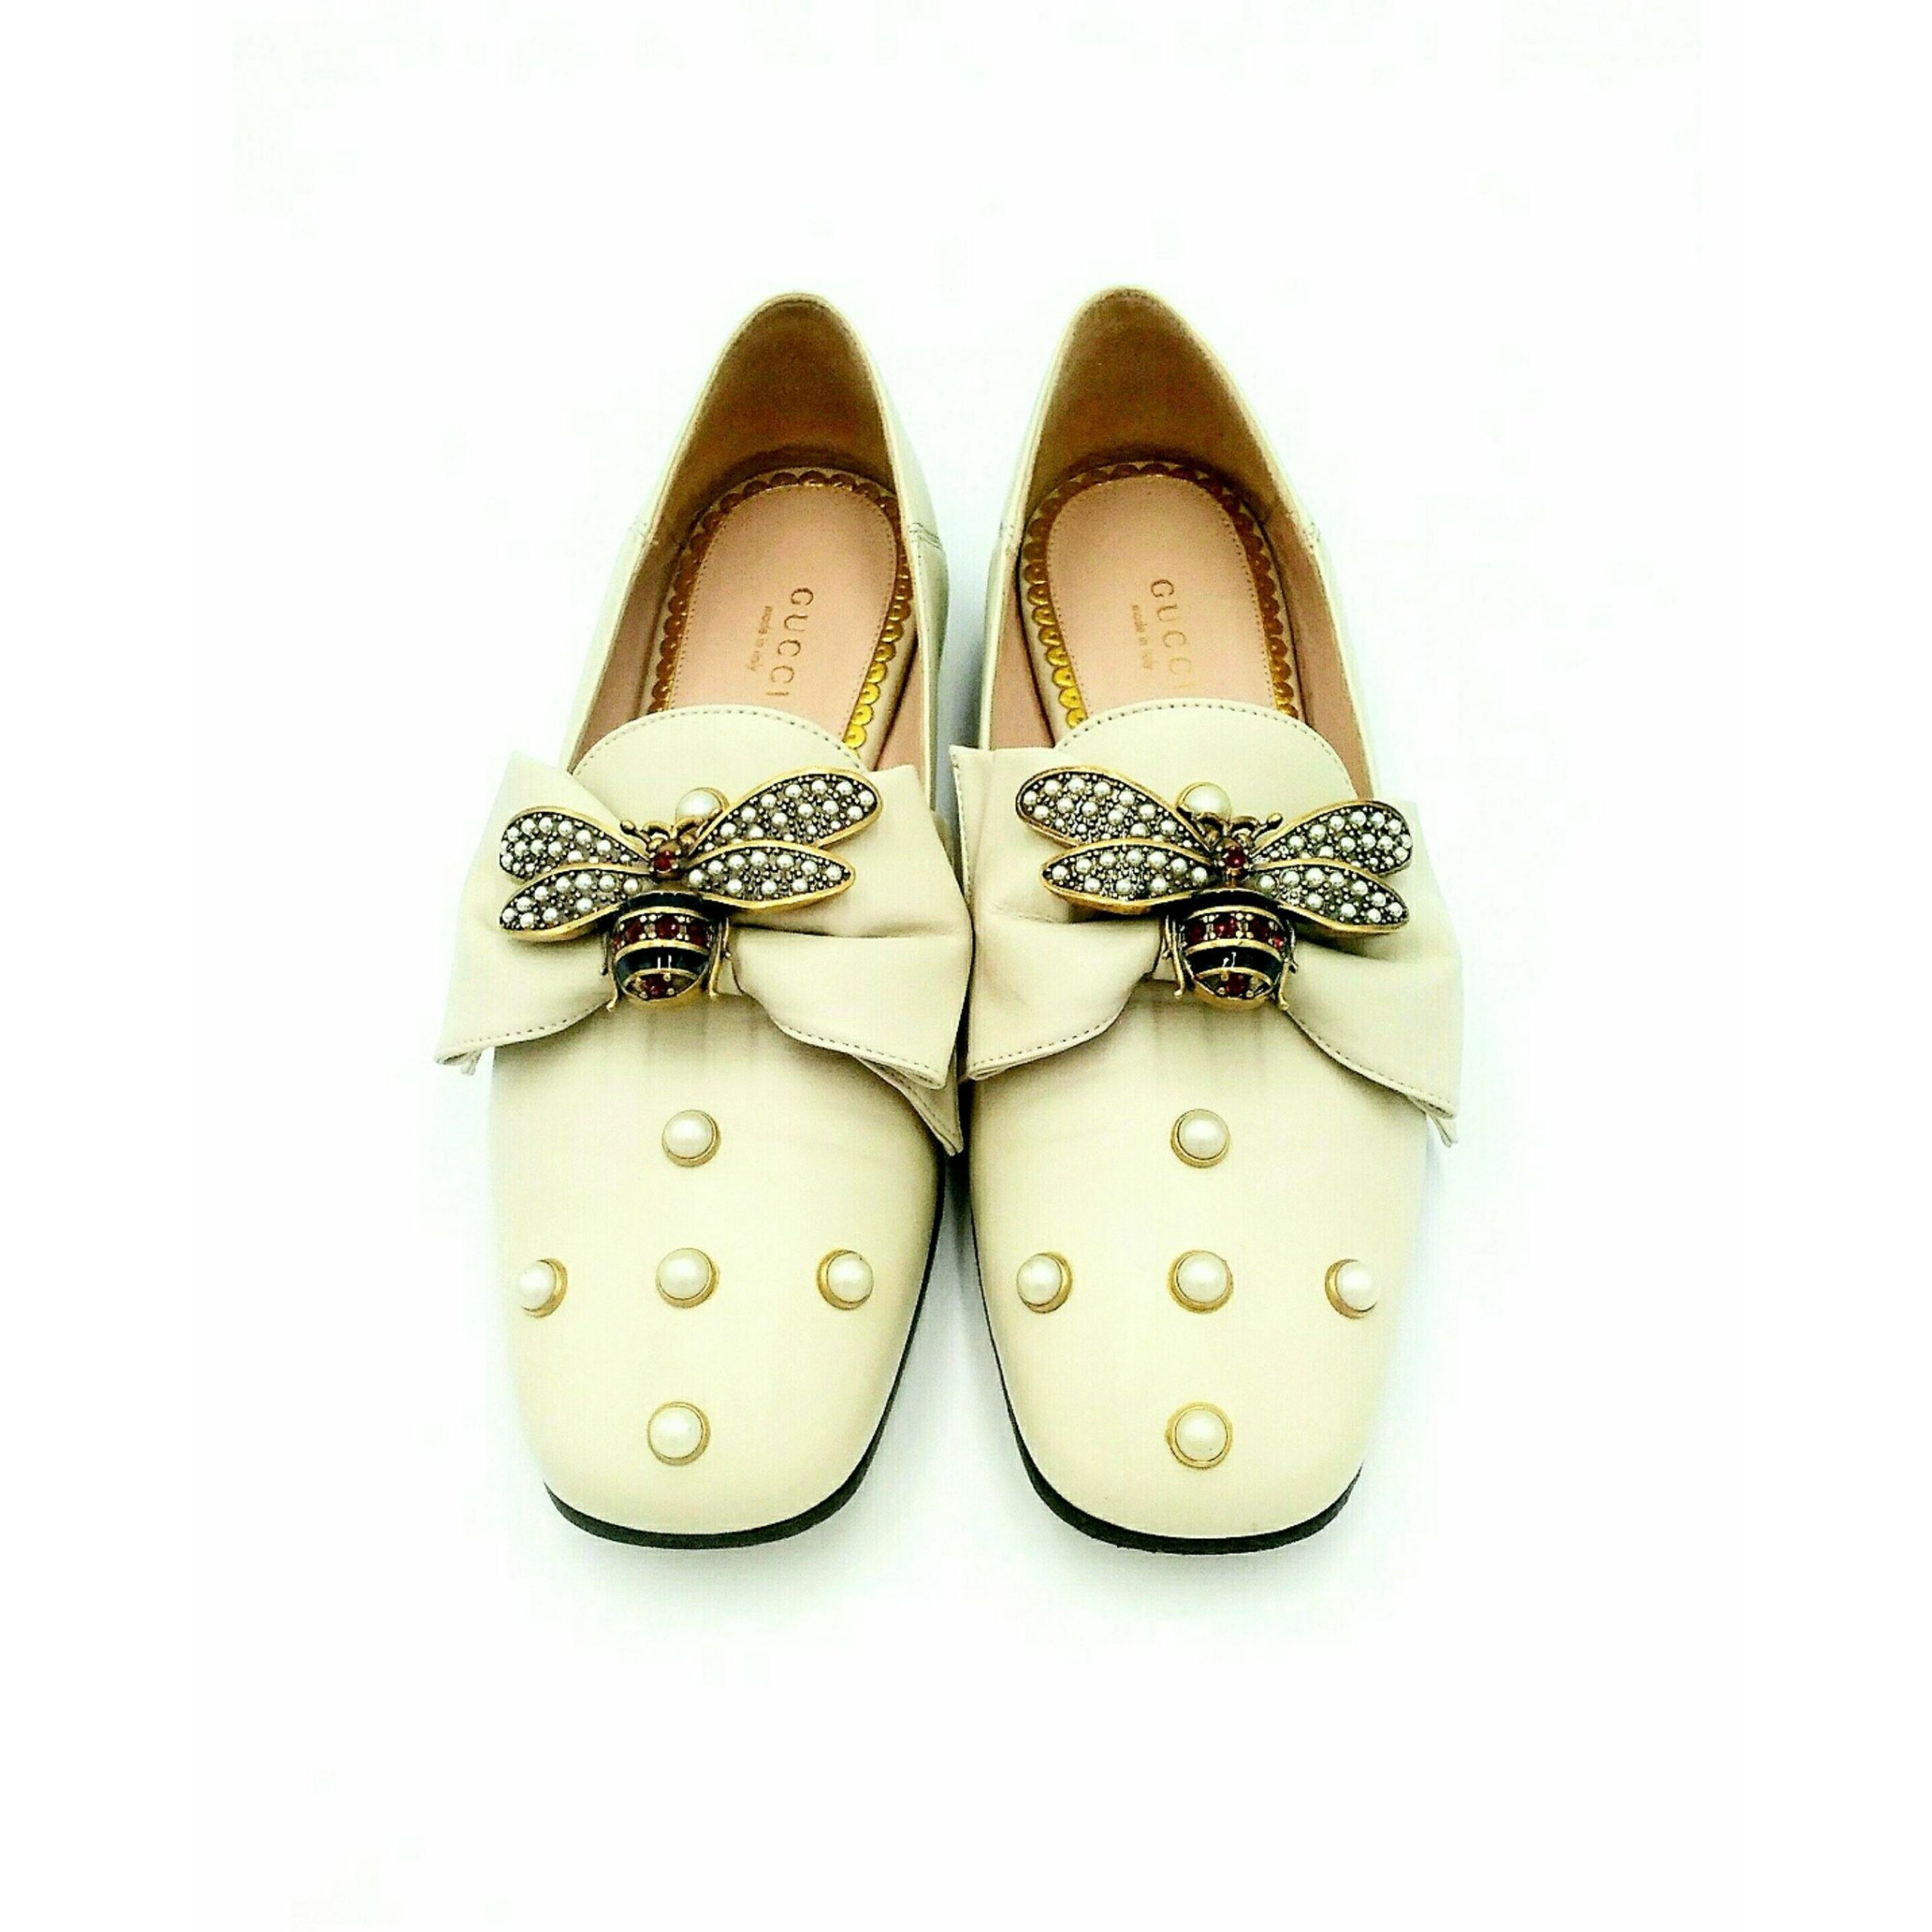 Authenticated Gucci Ballet Cream Leather Flats